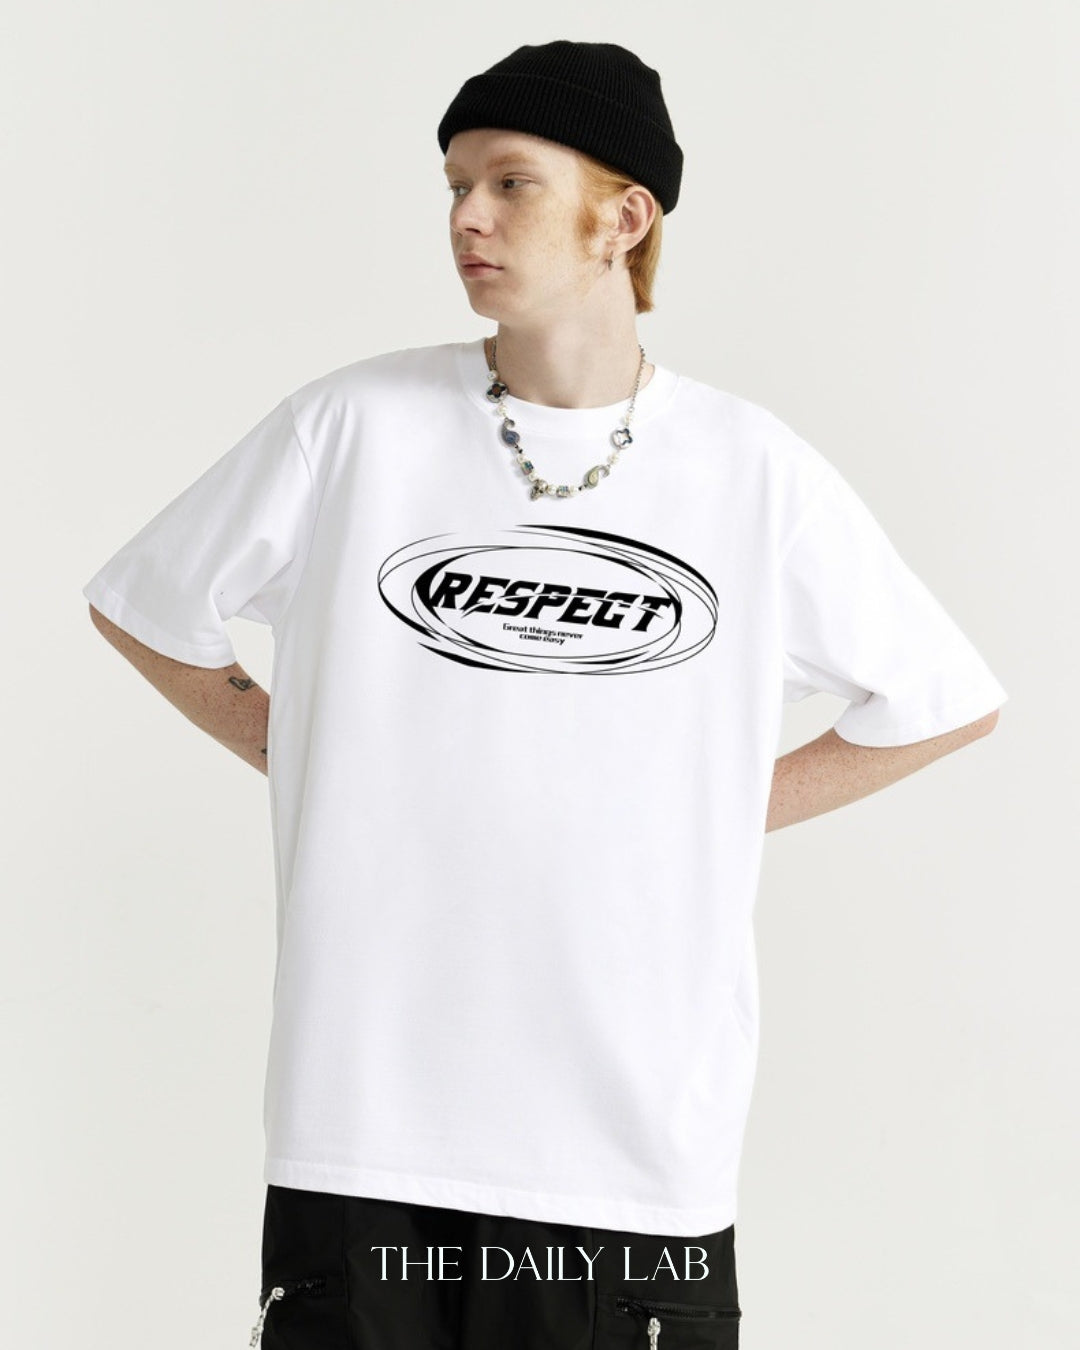 Respect Loose Tee in White